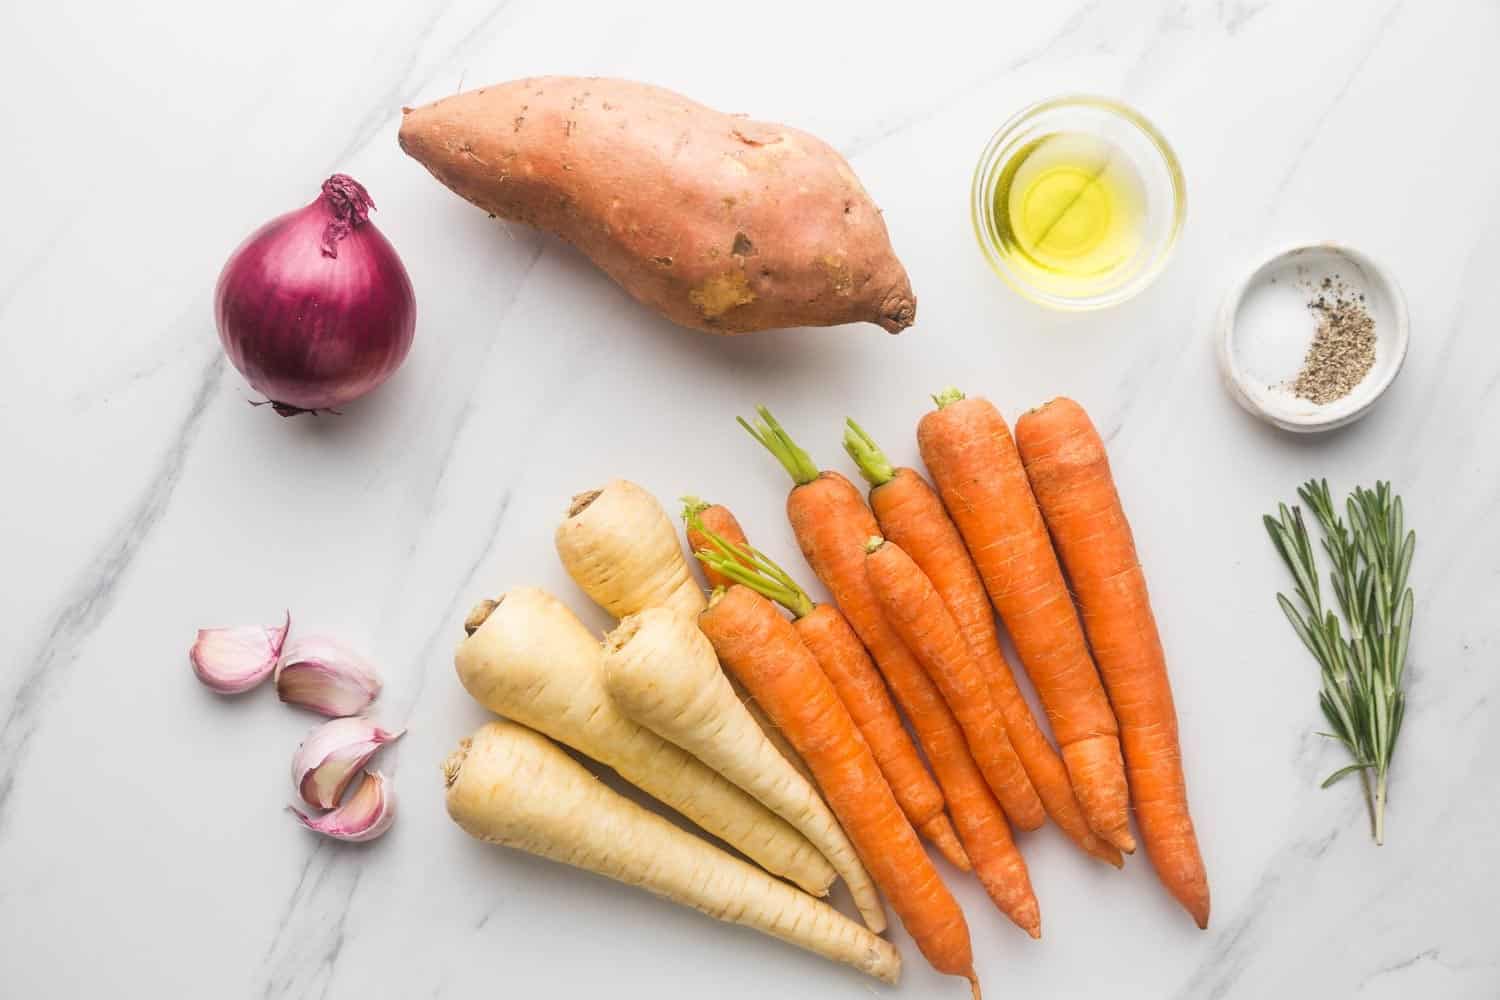 Ingredients needed to make roasted root vegetables including a sweet potato, red onion, carrots, parsnips, garlic, olive oil, rosemary, salt and pepper.